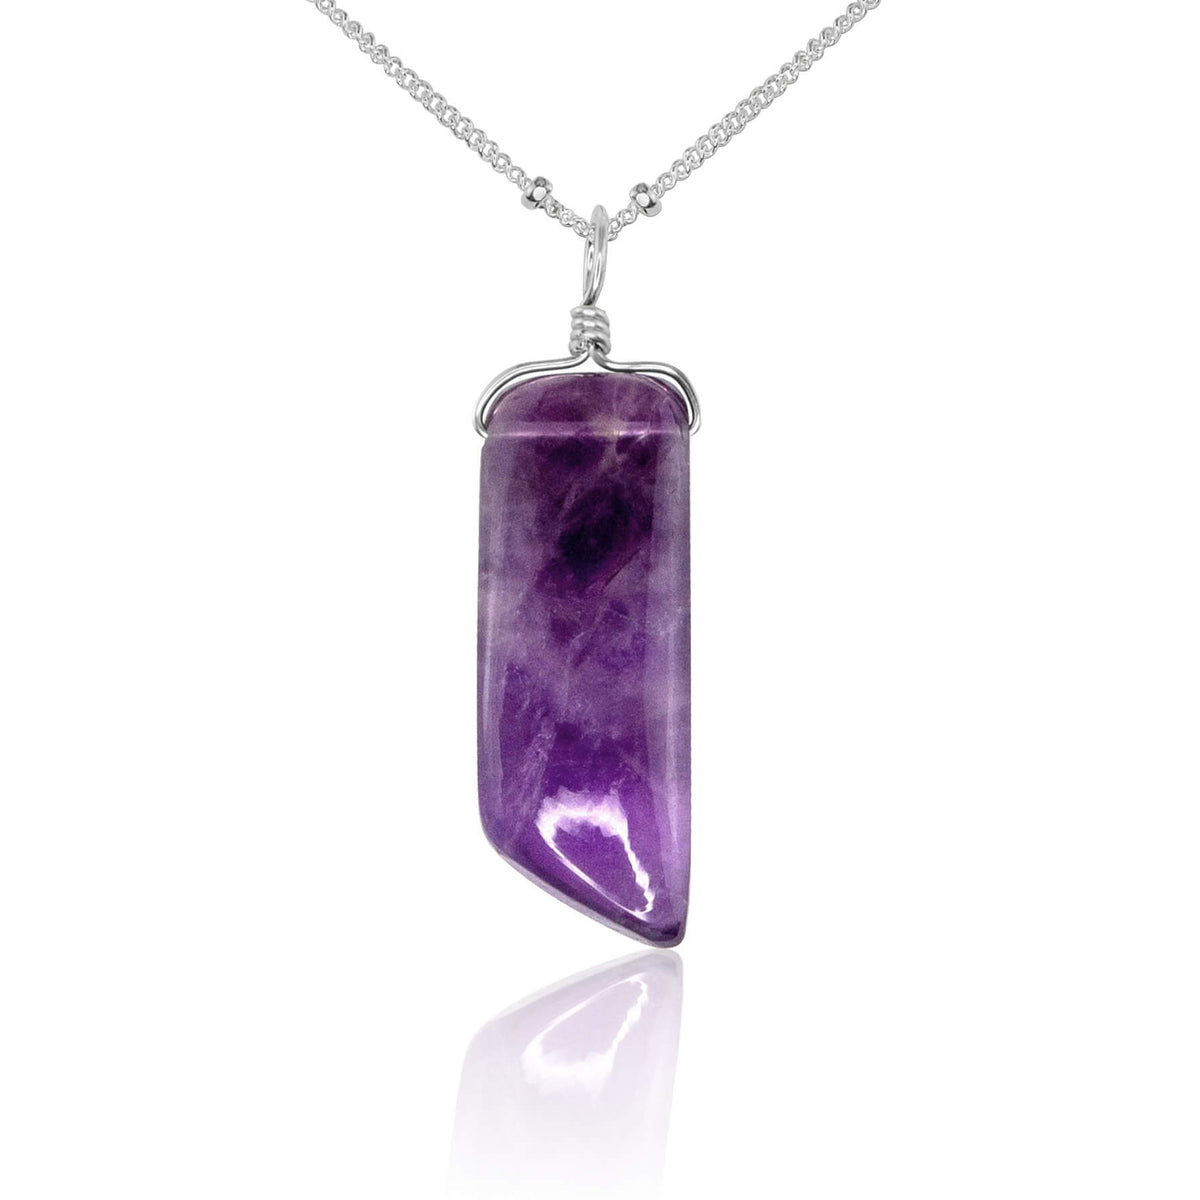 Smooth Point Pendant Necklace - Amethyst - Sterling Silver Satellite - Luna Tide Handmade Jewellery